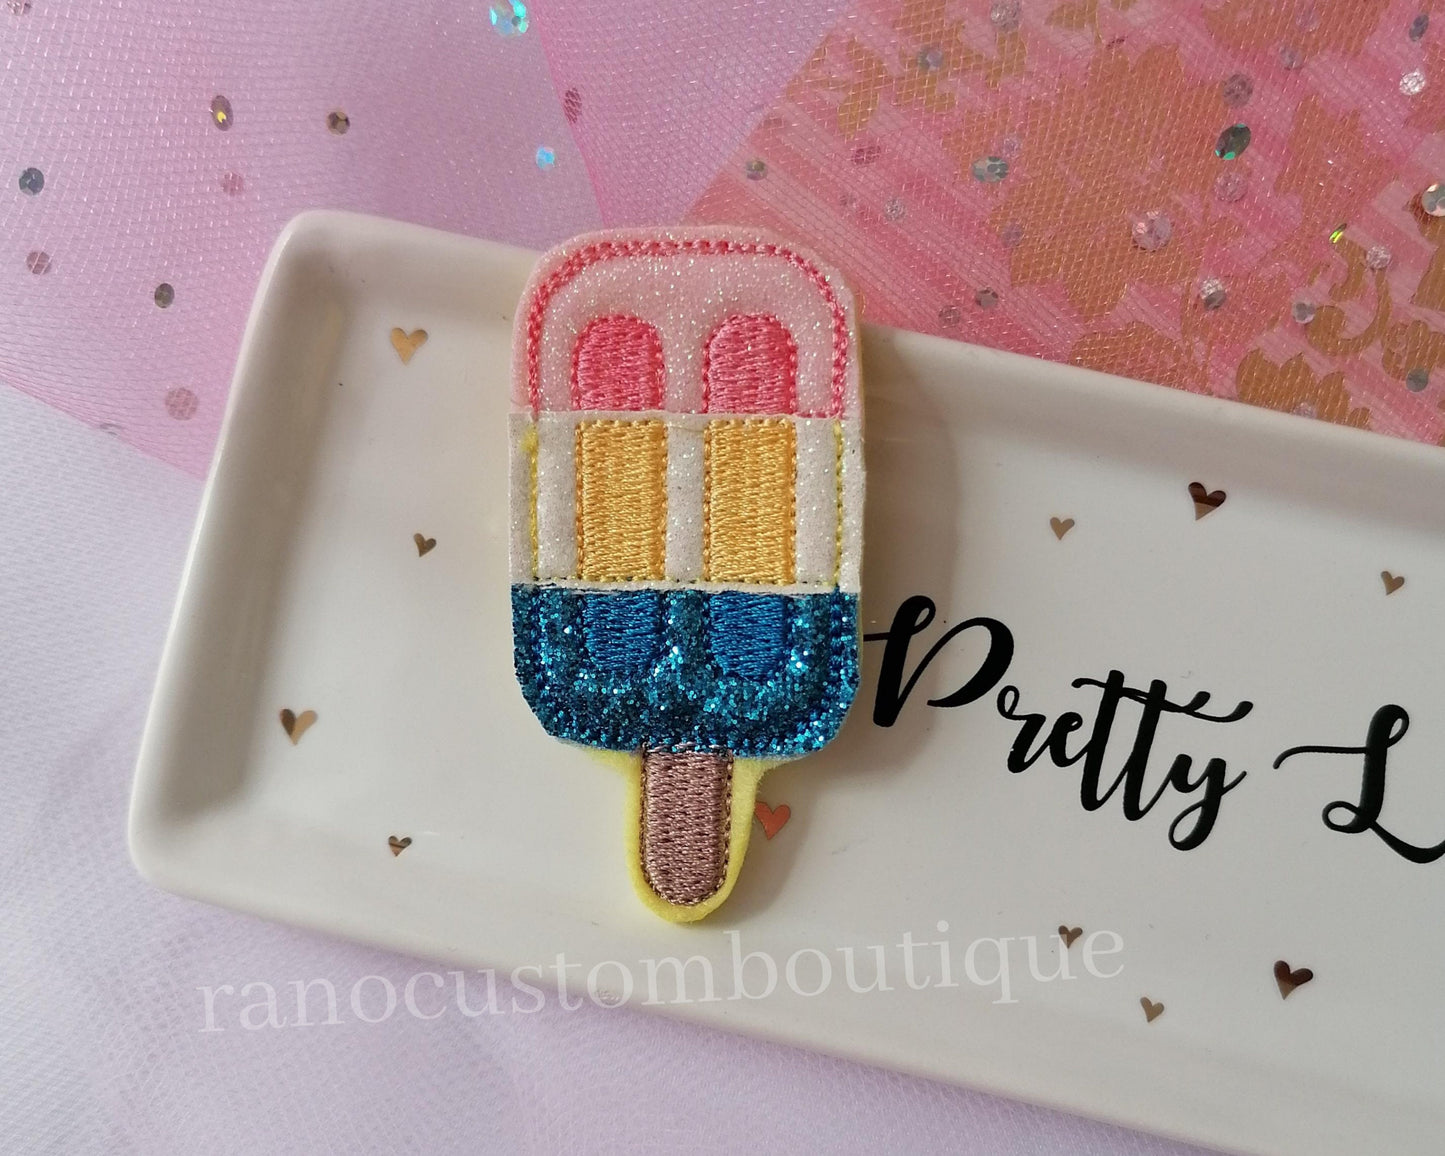 Coffee Embroidered Felt Design, Embroidered Fruit Design, Popsicle Feltie, Doughnut Embroidered Embellishments, Embroidered Design